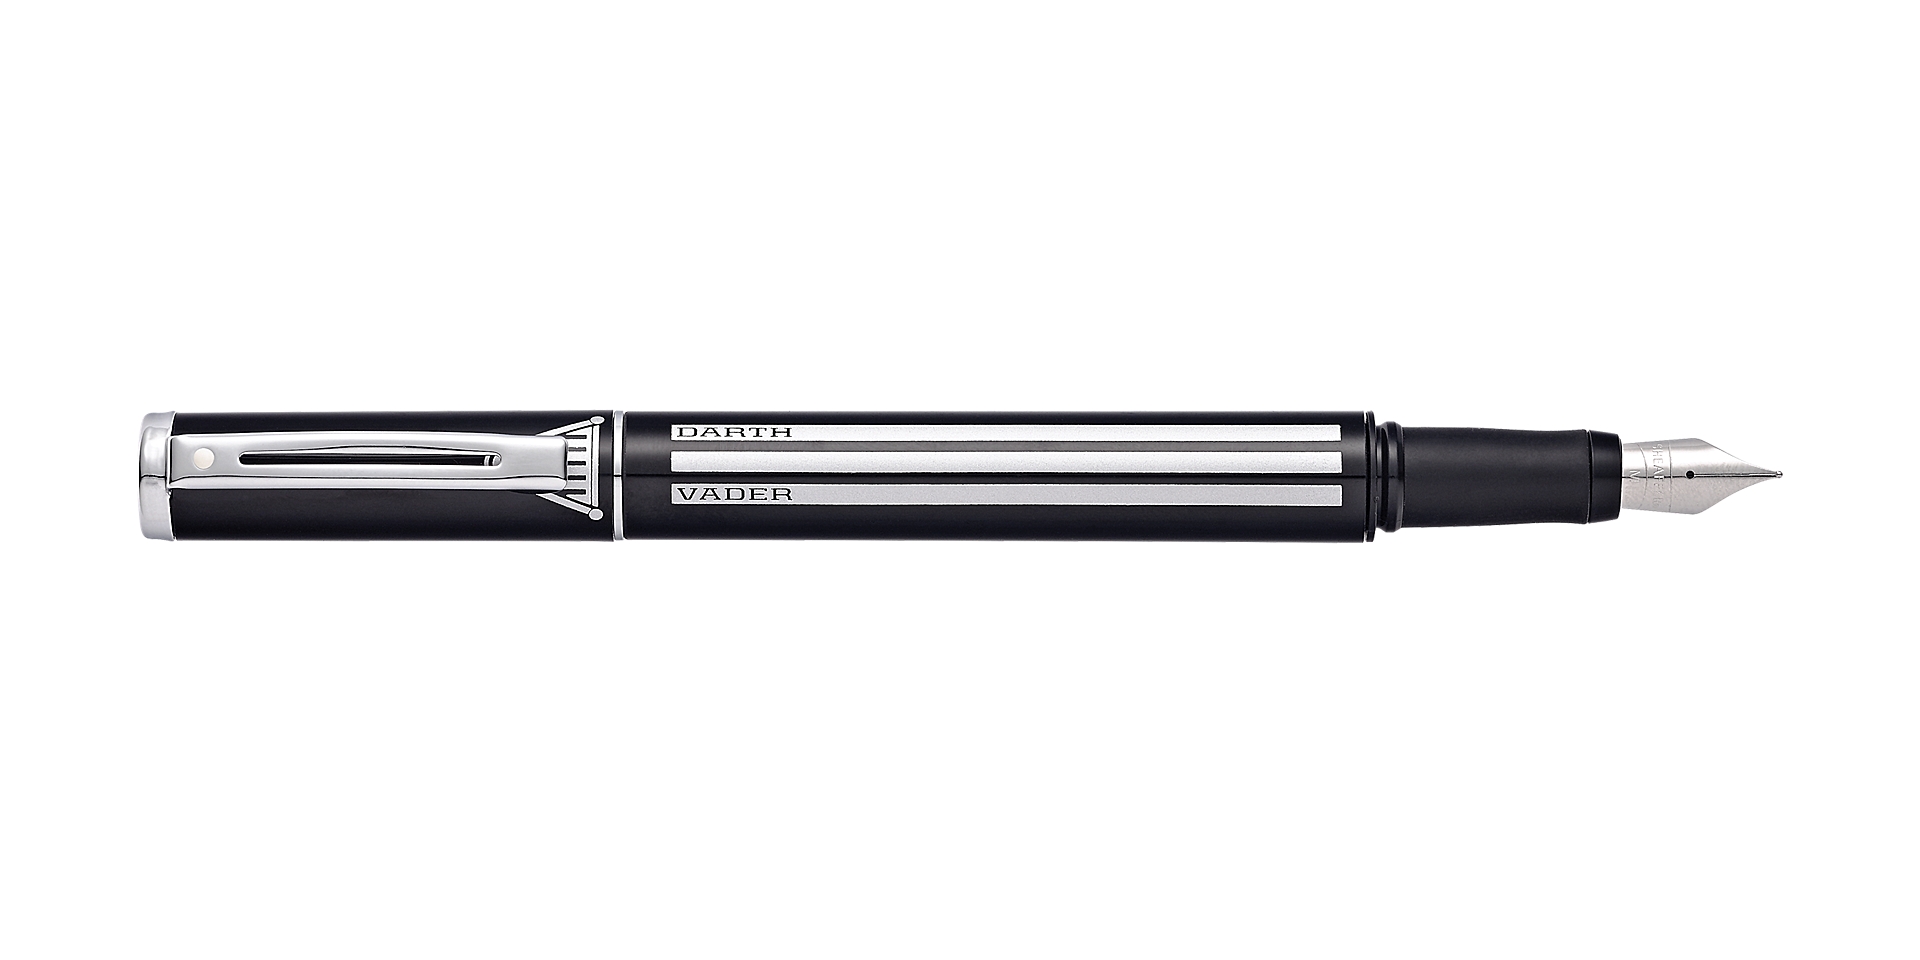 Cross The Sheaffer Star Wars™ Pop Darth Vader™ Fountain Pen Picture